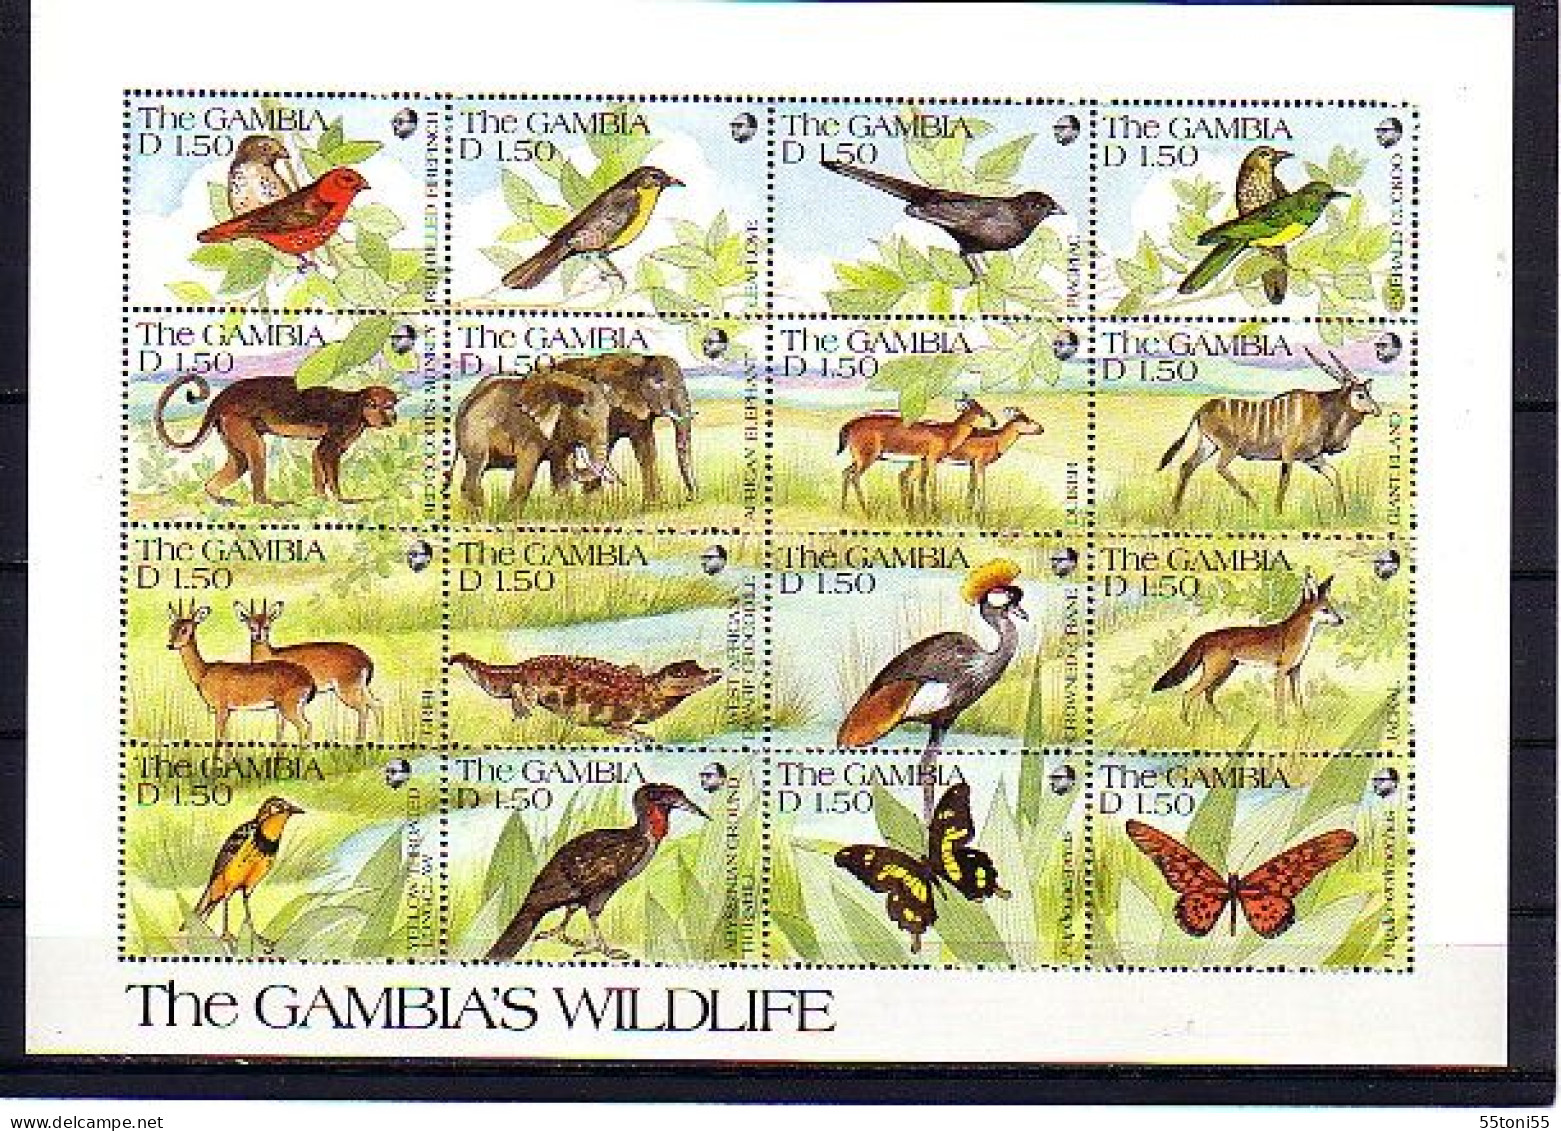 1991 Fauna  The GAMBIA'WILDLFF " 48 V.-MNH (3 S/M X16 V)  GAMBIA - Gambia (1965-...)